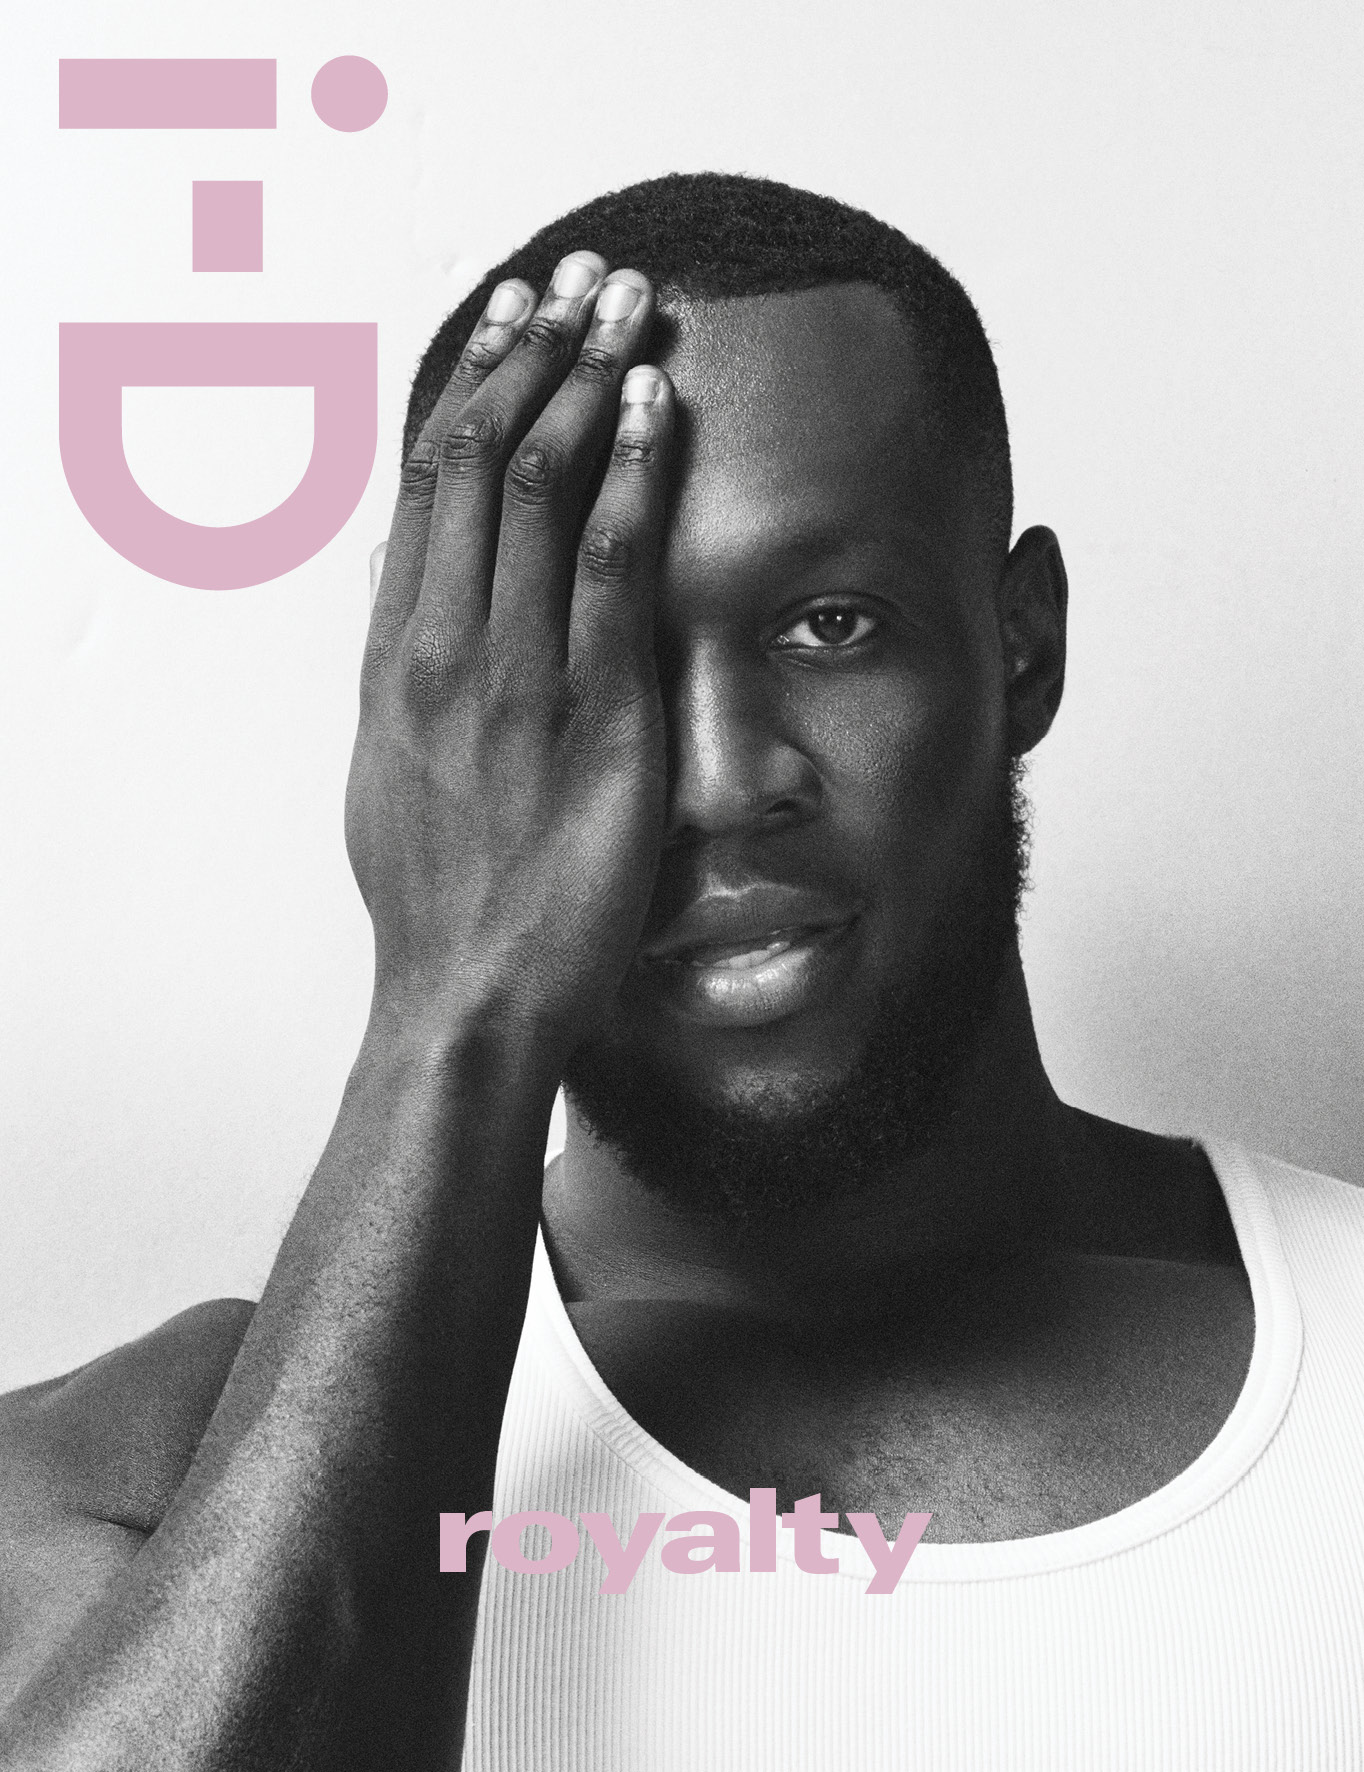 Stormzy discusses his third album This Is What I Mean with Rick Rubin